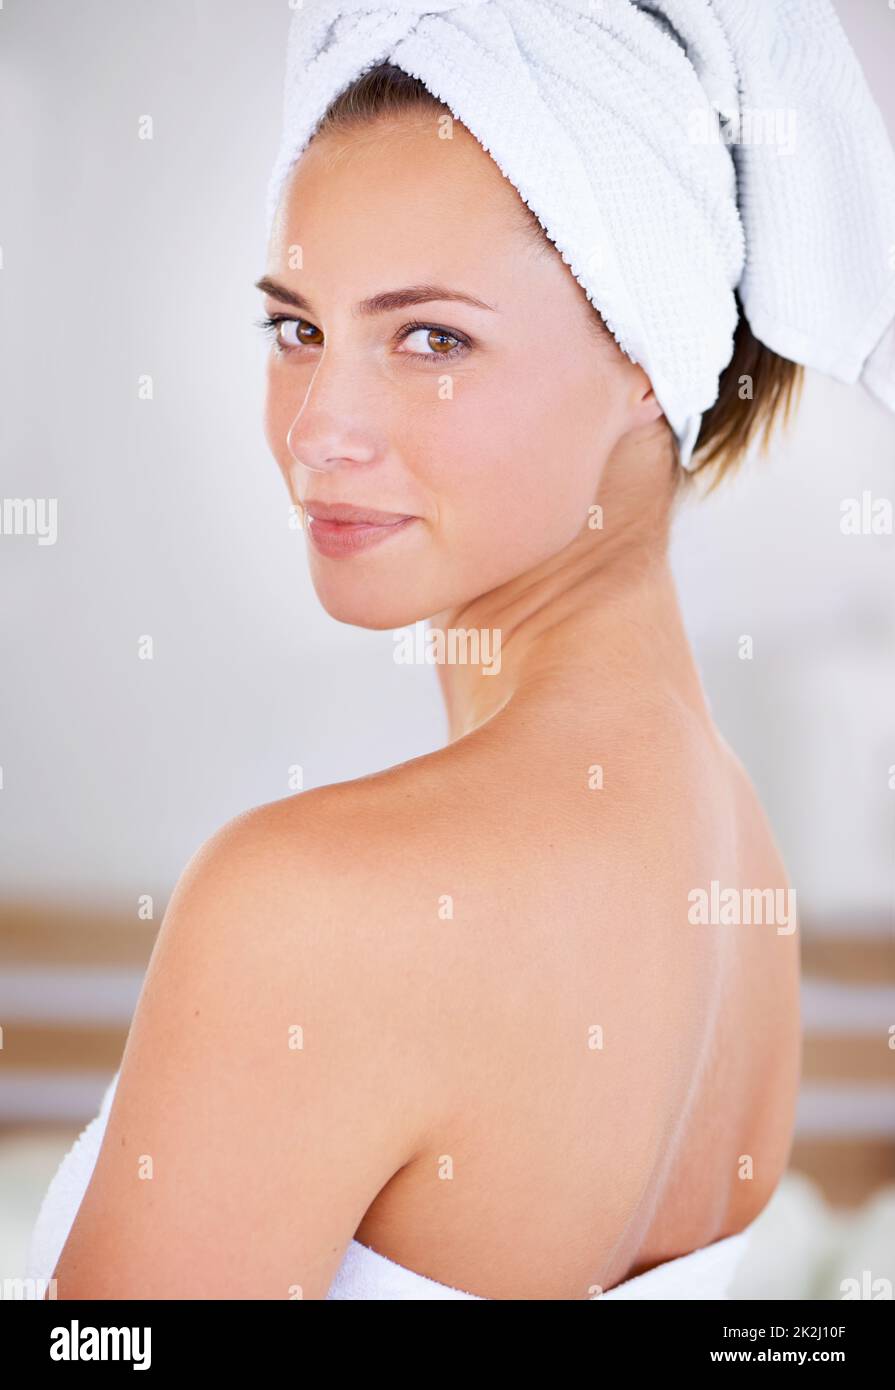 Feeling fresh and revitalised. Cropped shot of a beautiful woman during her morning beauty routine. Stock Photo